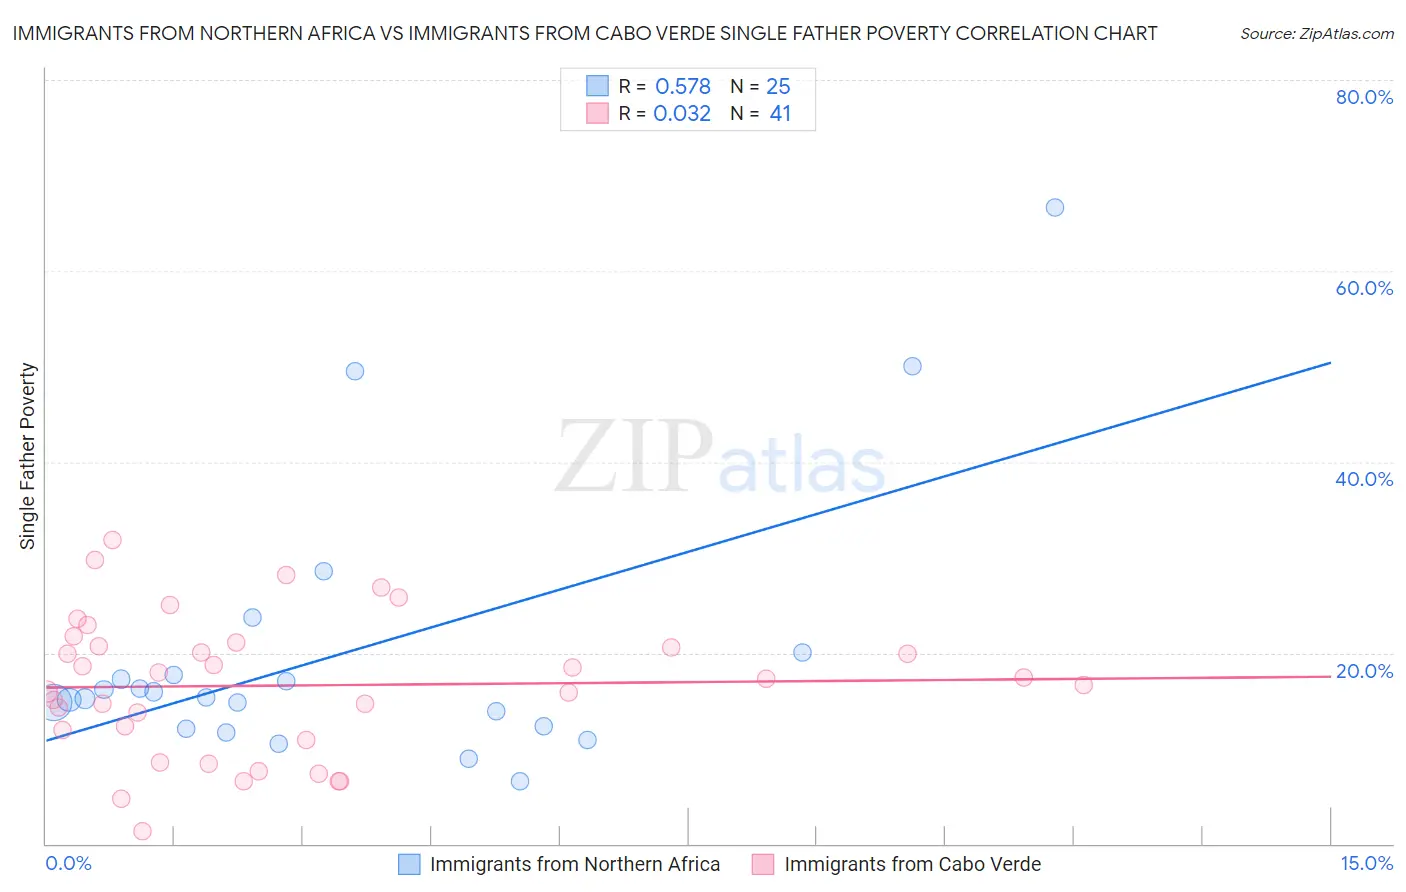 Immigrants from Northern Africa vs Immigrants from Cabo Verde Single Father Poverty